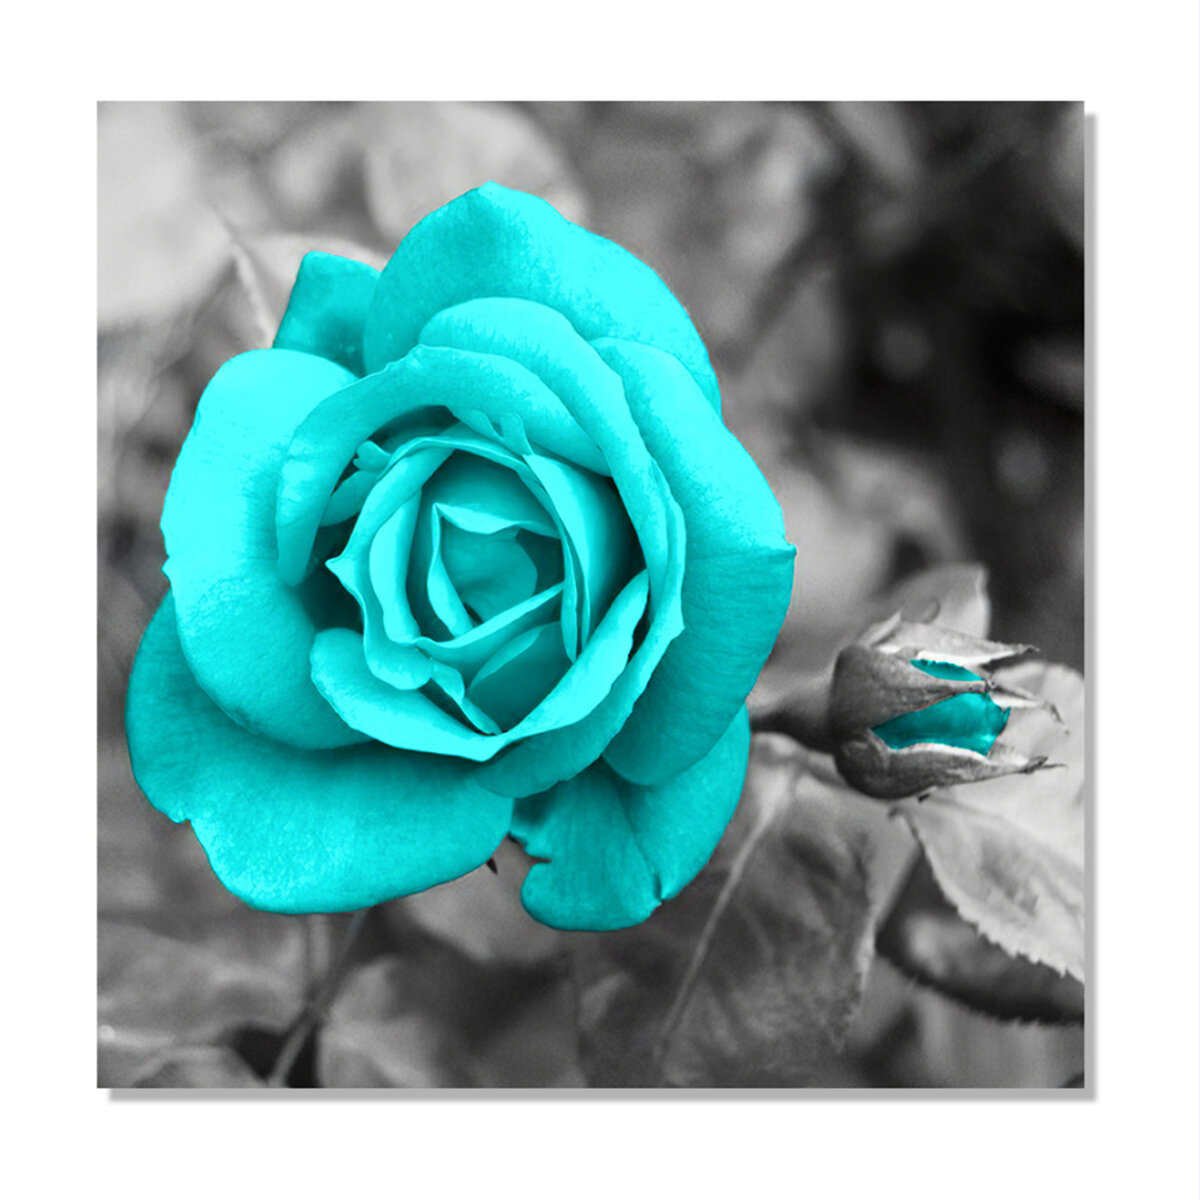 Blue Rose Canvas Painting Wall Decorative Print Art Pictures Unframed Wall Hanging Home Office Wall 